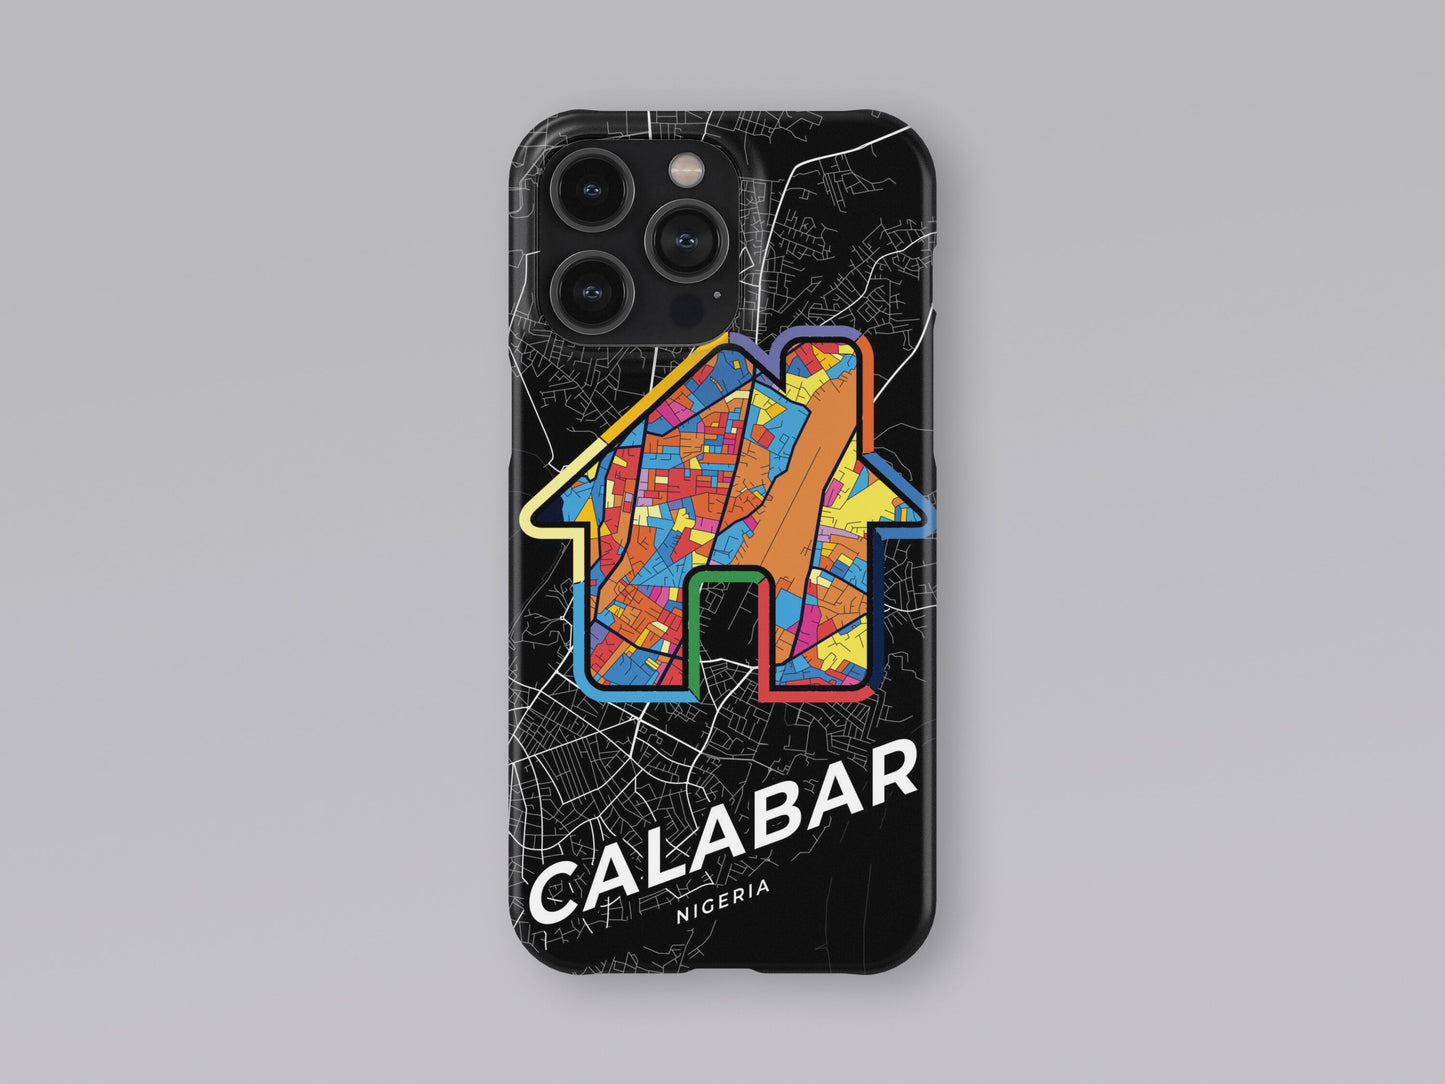 Calabar Nigeria slim phone case with colorful icon. Birthday, wedding or housewarming gift. Couple match cases. 3